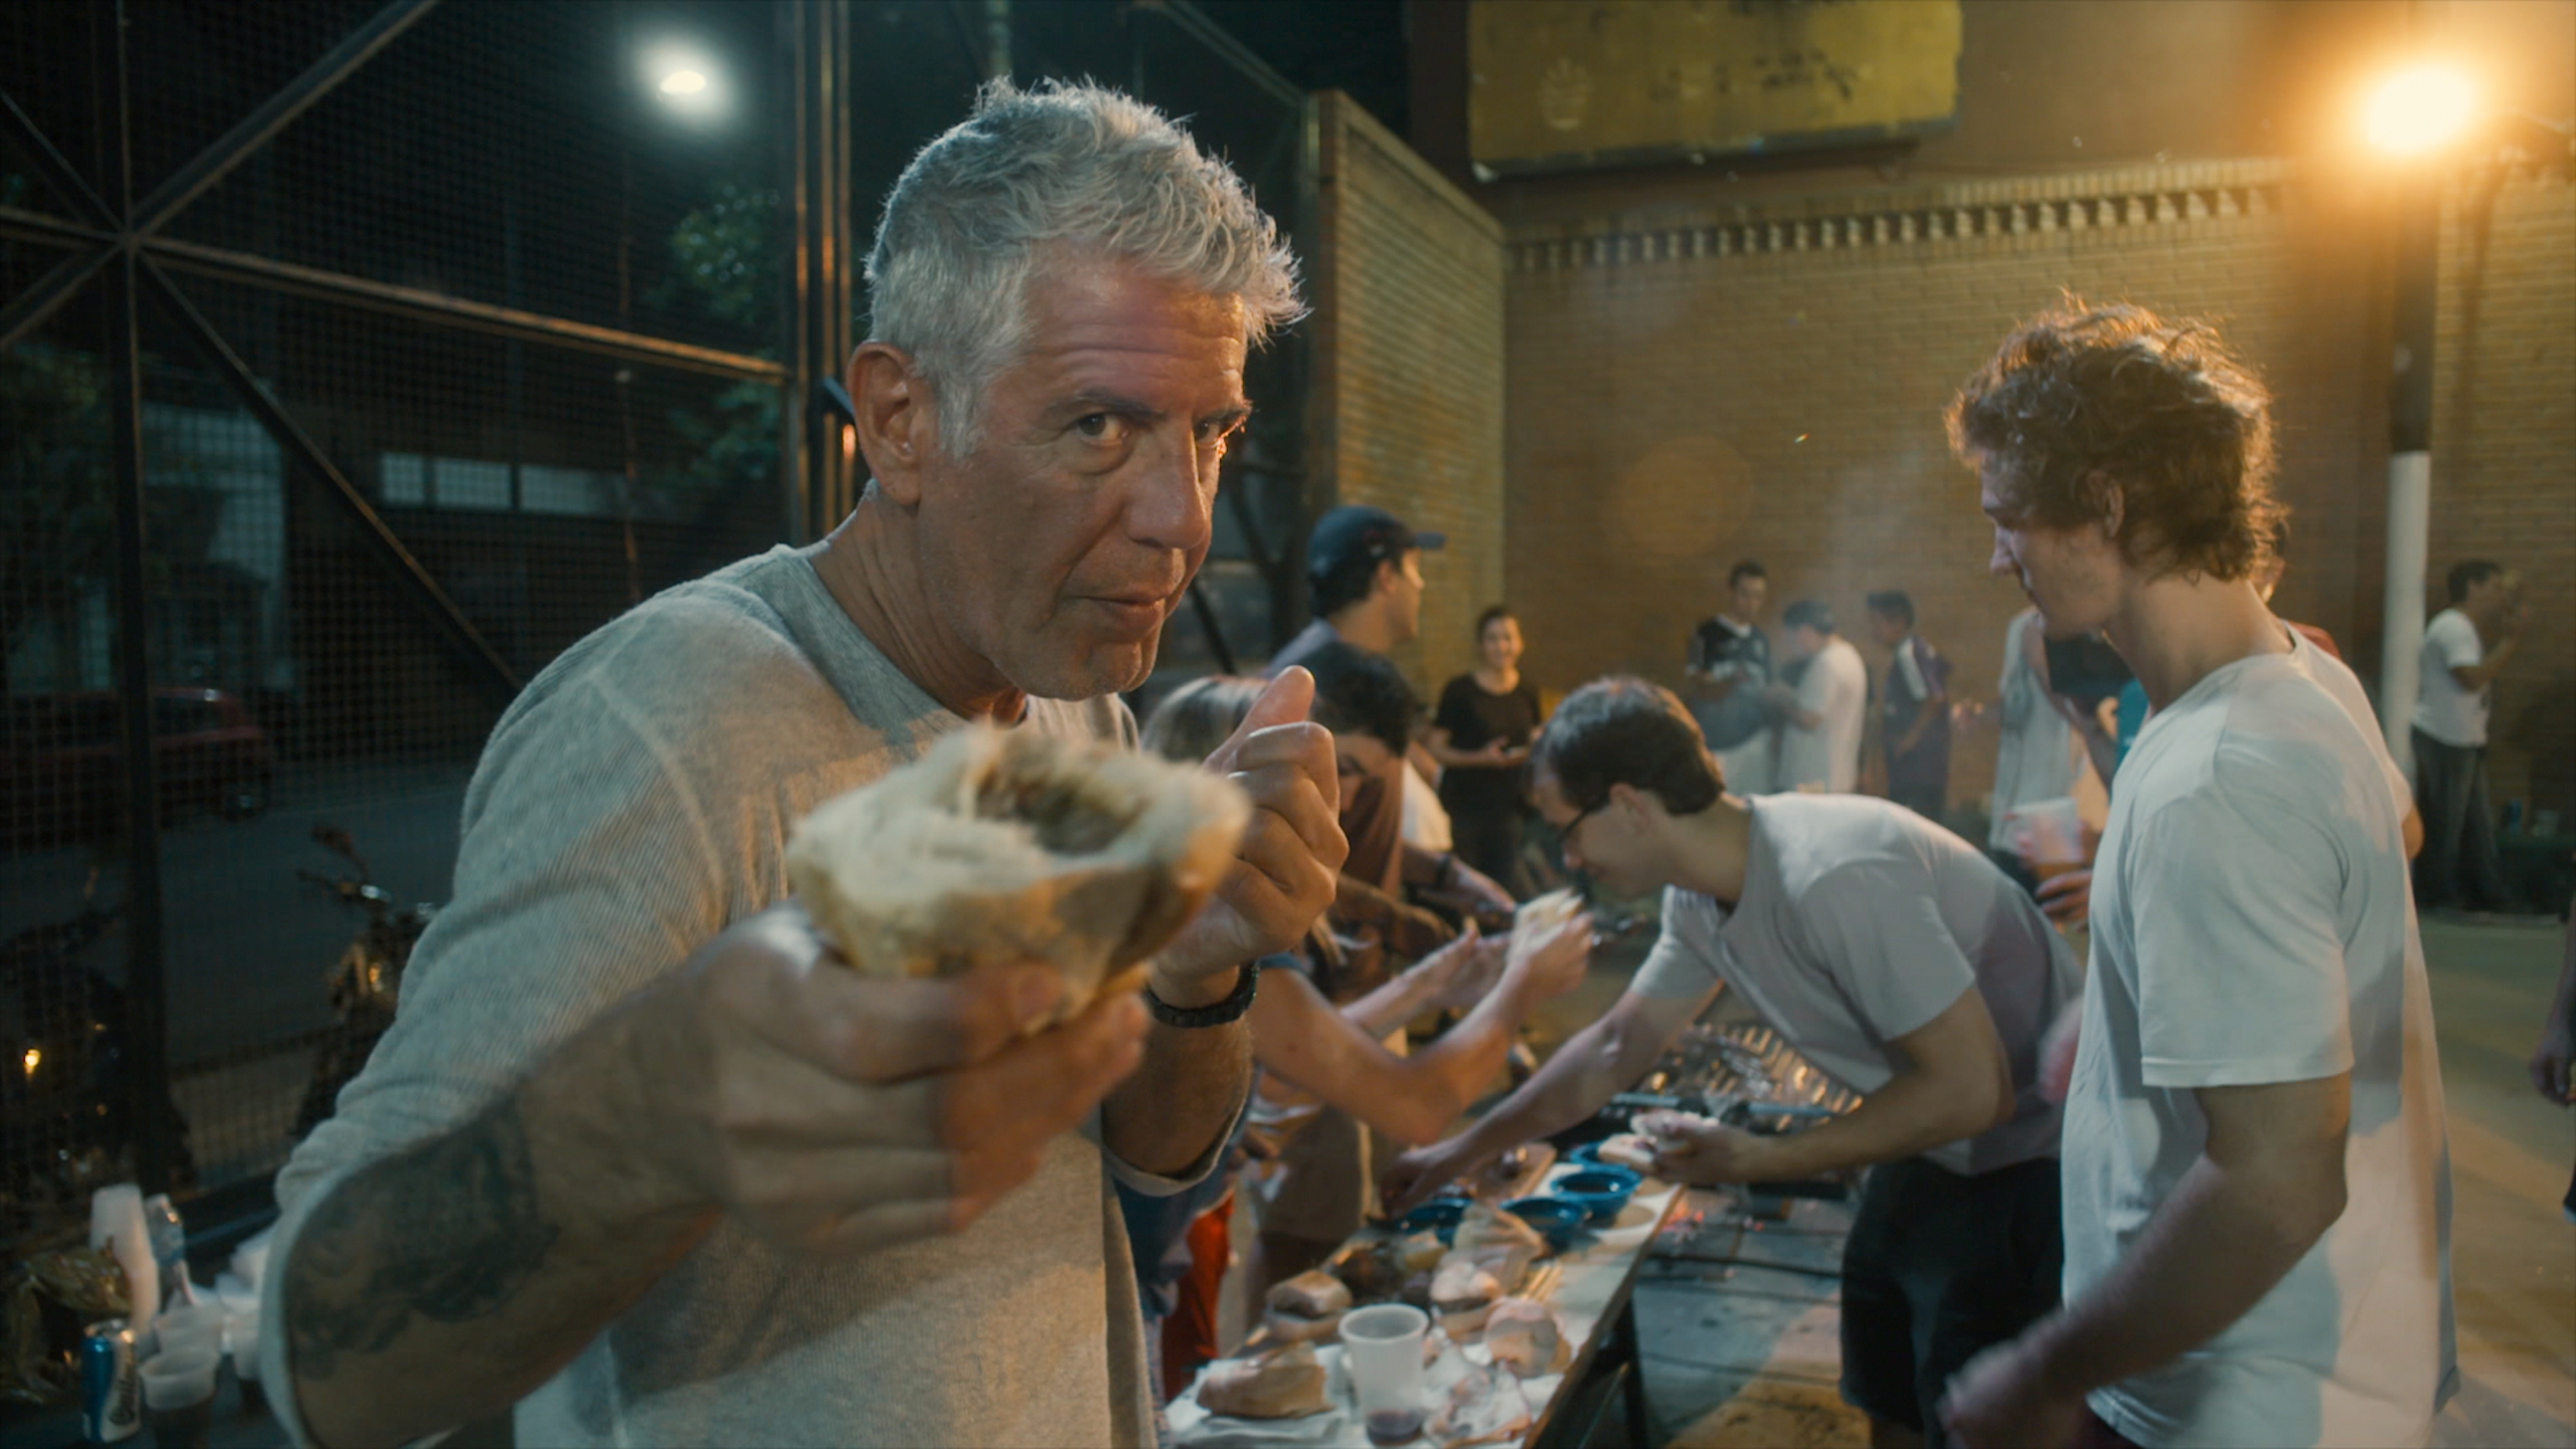 Roadrunner both dispels and reinforces the myth of Anthony Bourdain